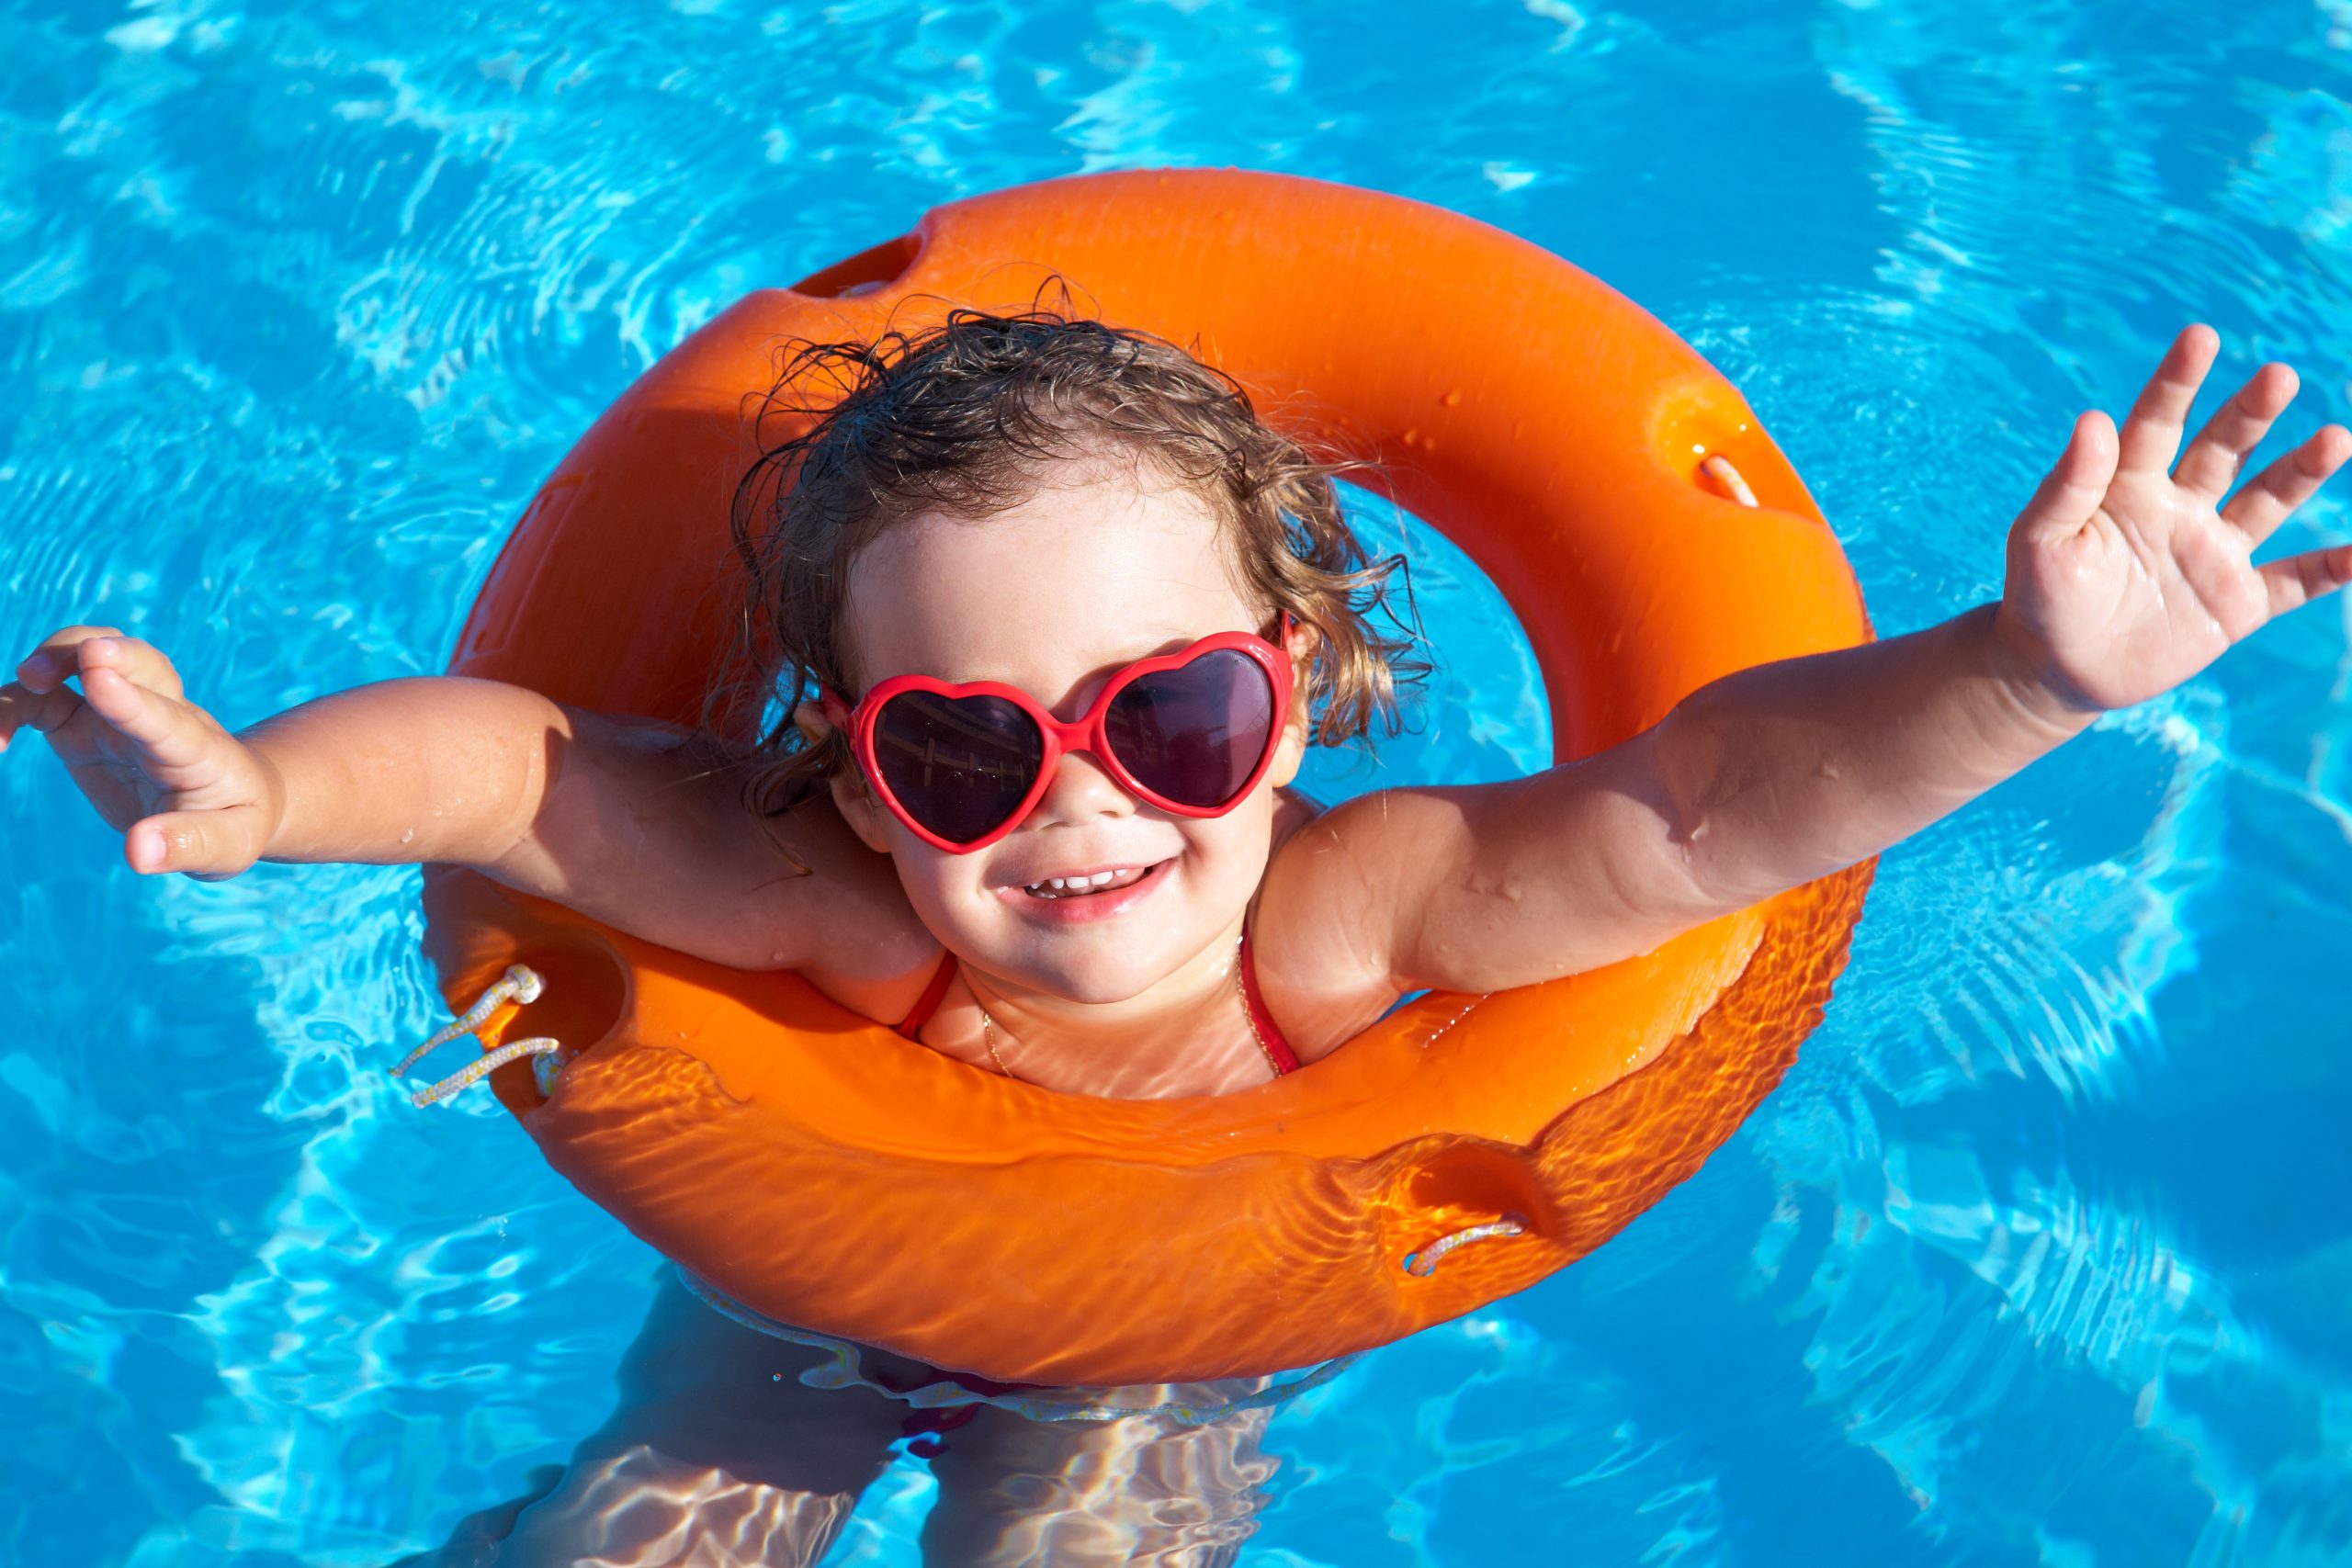 Above Ground Pool Safety: Tips for Keeping Your Family and Guests Safe